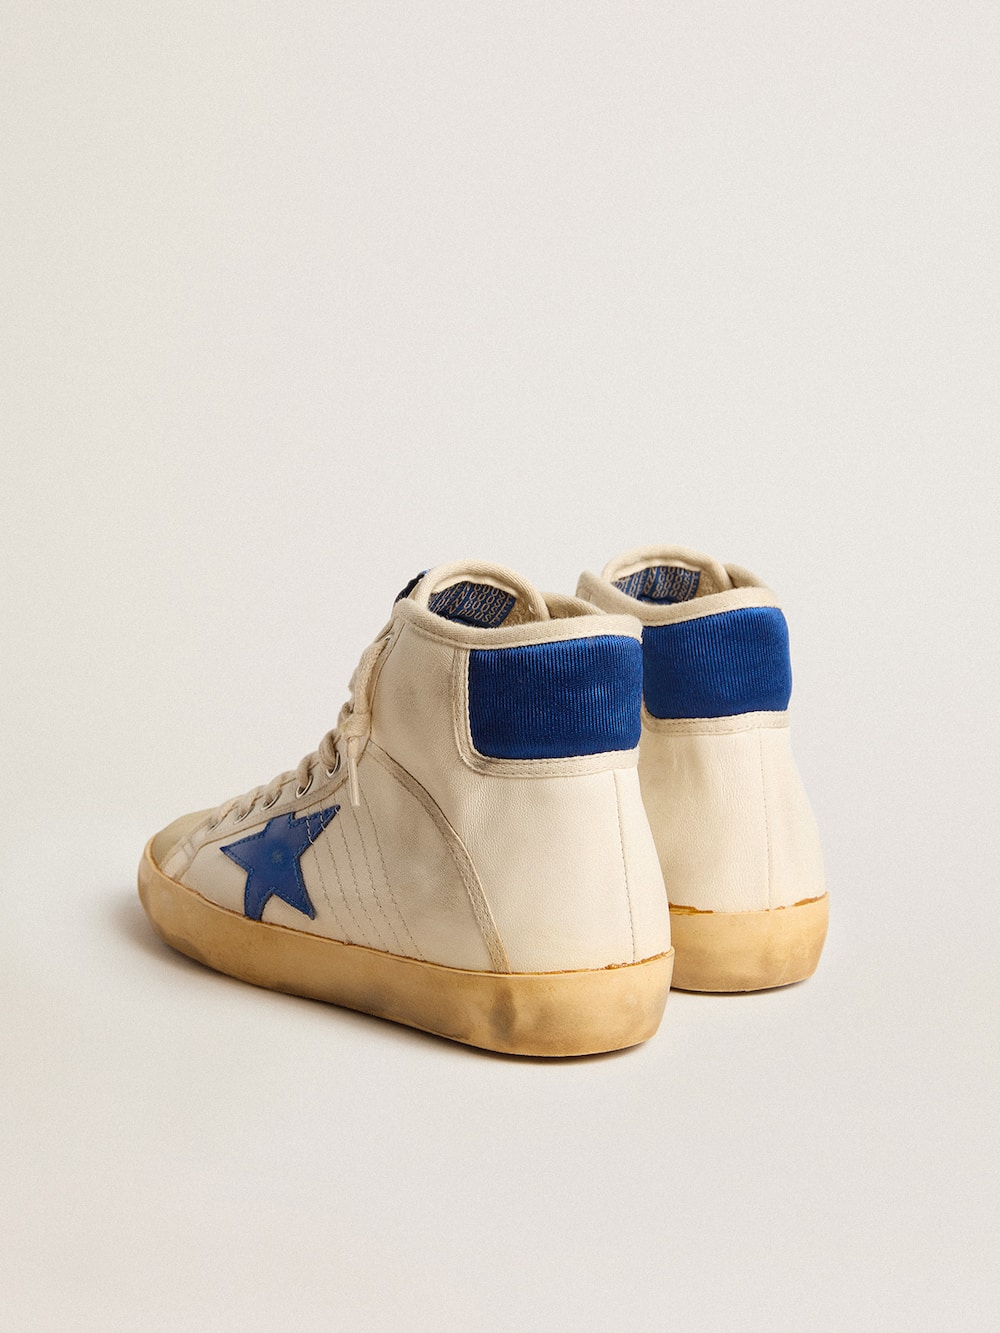 Golden Goose - Women’s Francy Penstar LAB in nappa leather with blue star and nylon heel tab in 